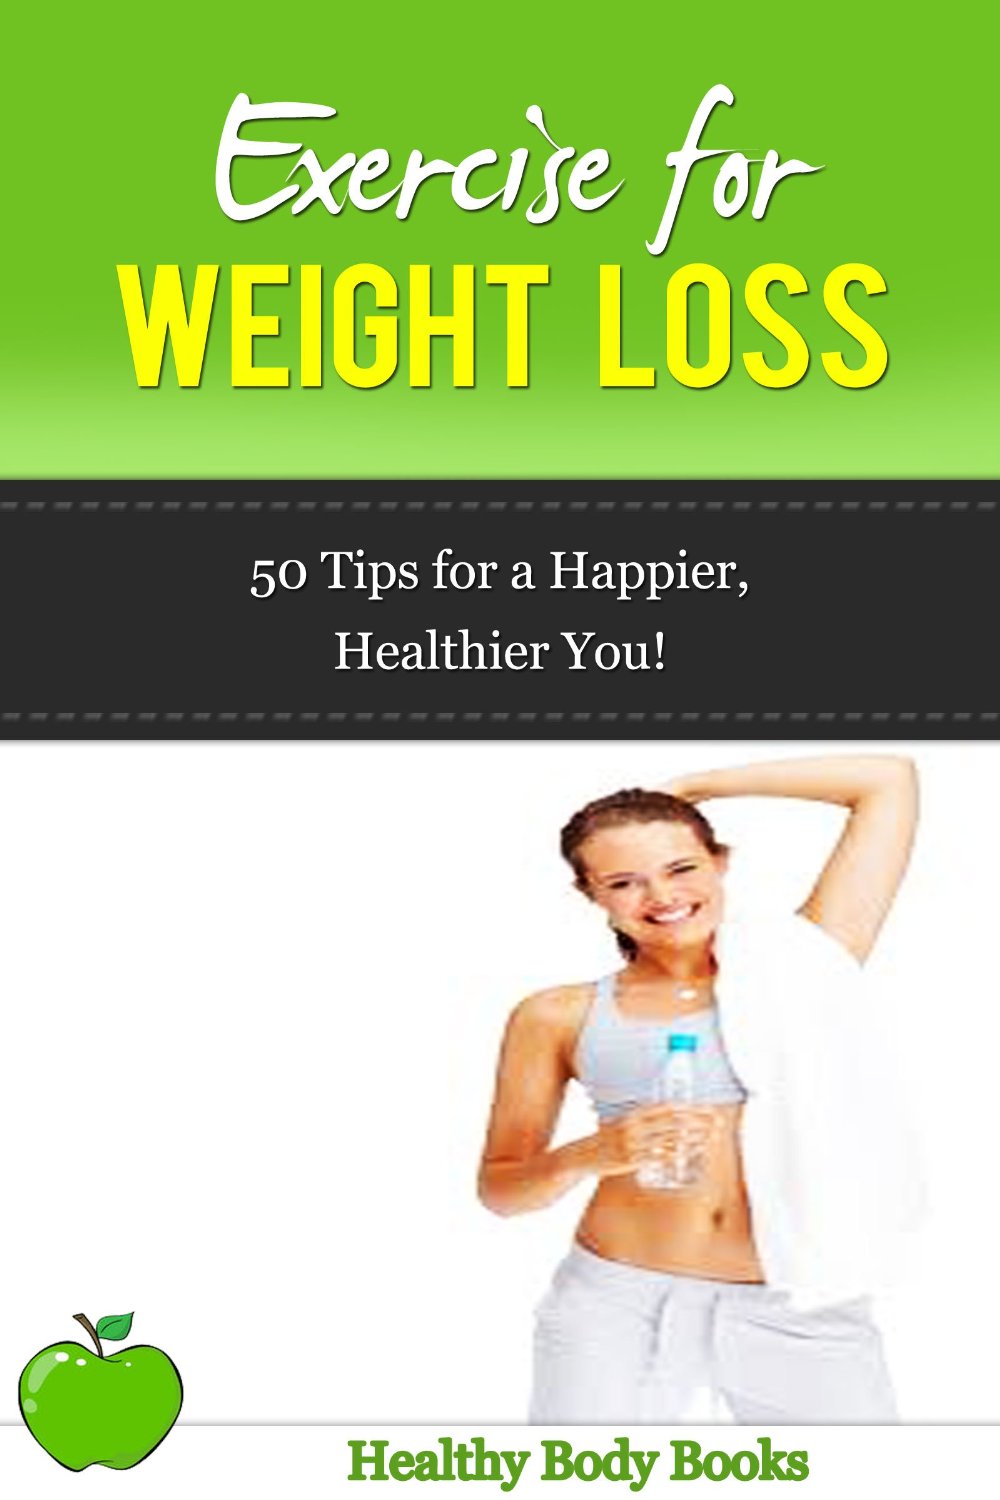 Exercise for Weight Loss: 50 Tips to a Happier, Healthier You! by Simone Lea